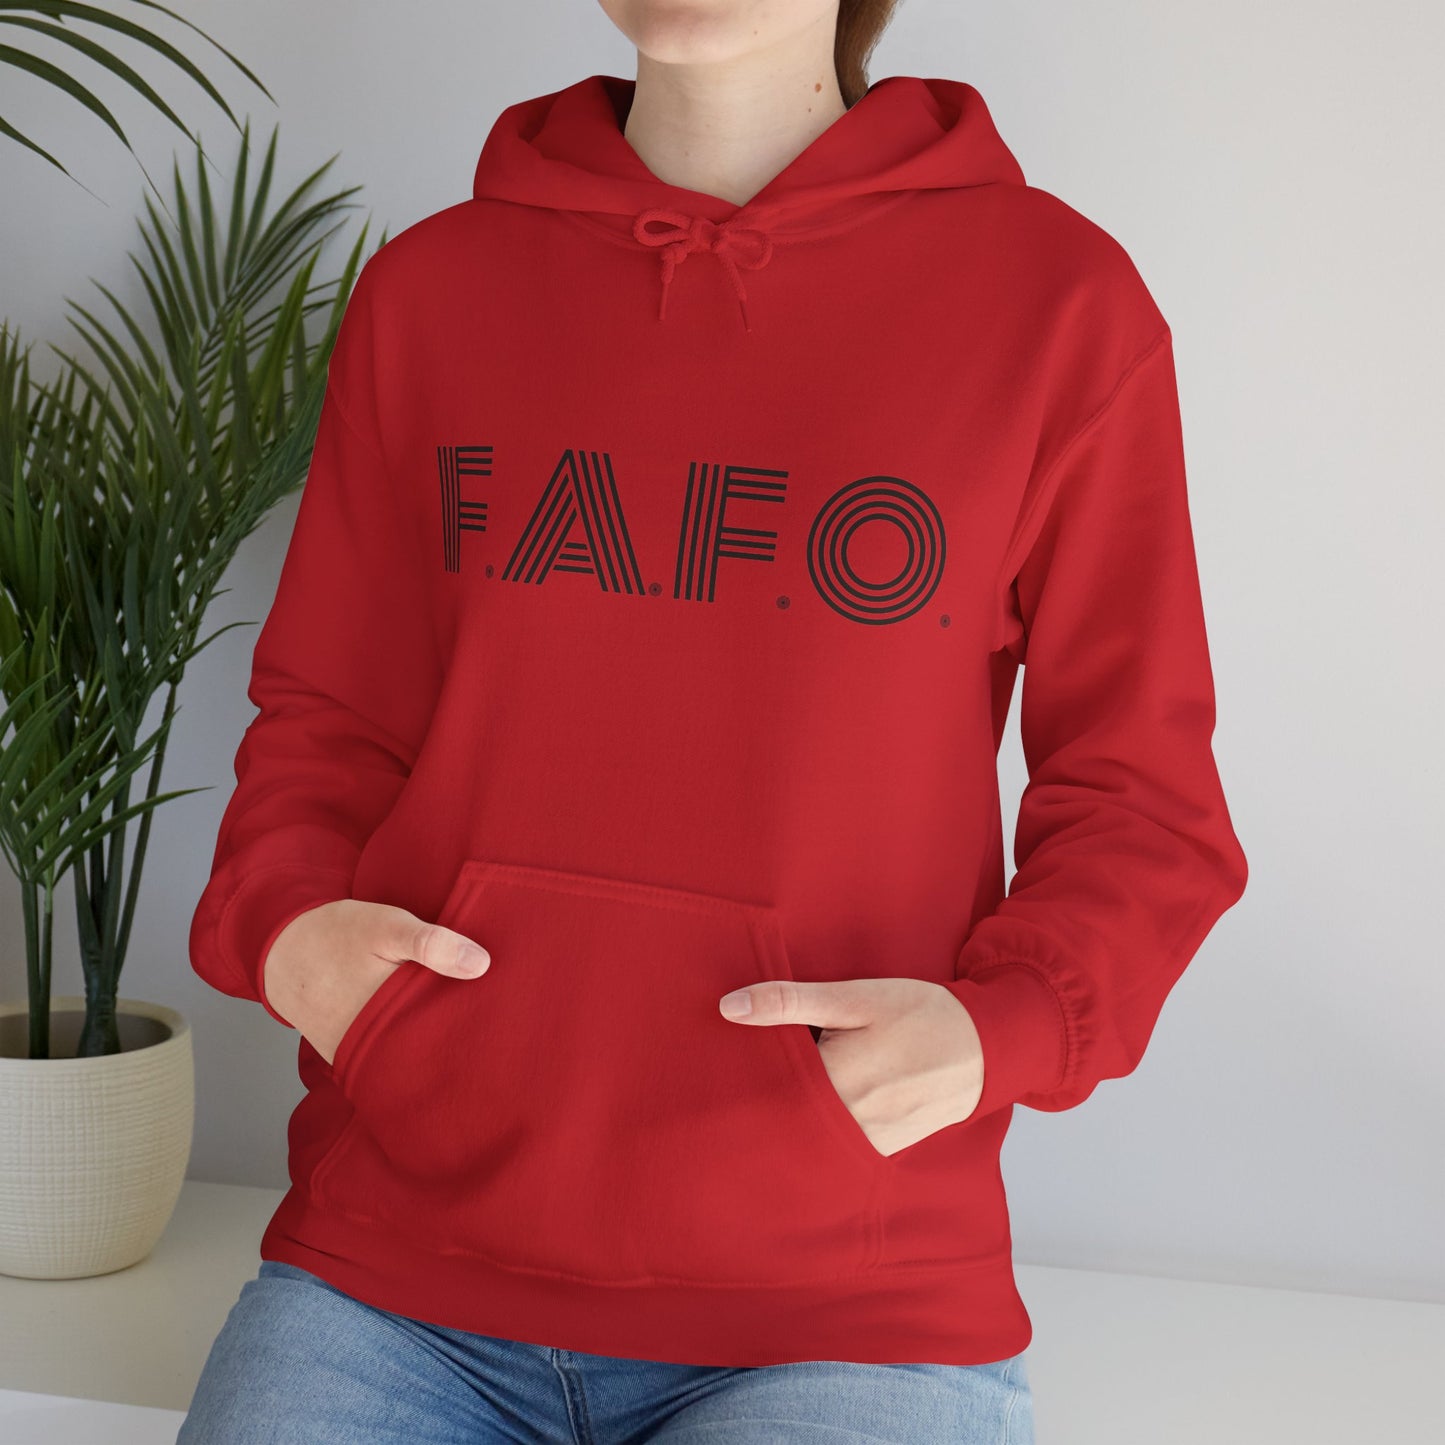 FAFO Hooded Sweatshirt For Sarcastic Humor Hoodie For Just Try It Sweatshirt For Funny Gift Idea